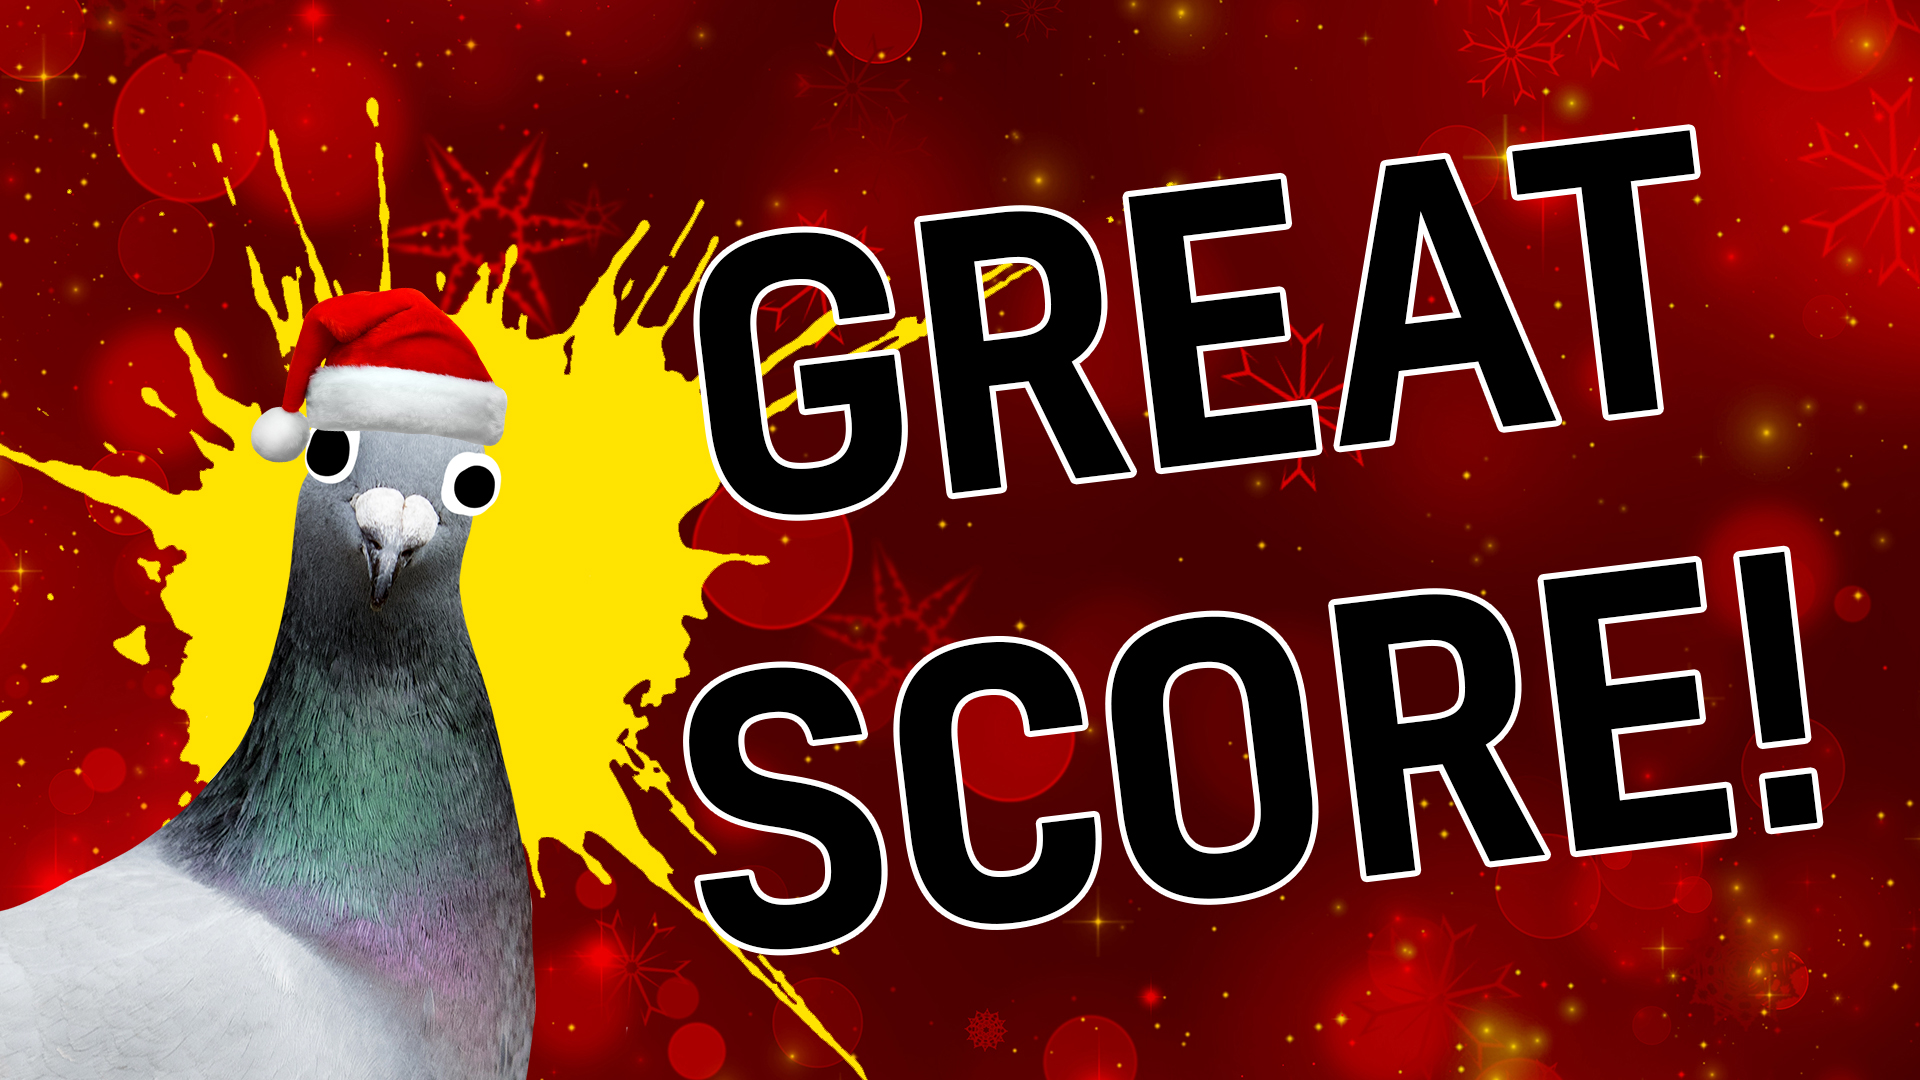 Result: Great score